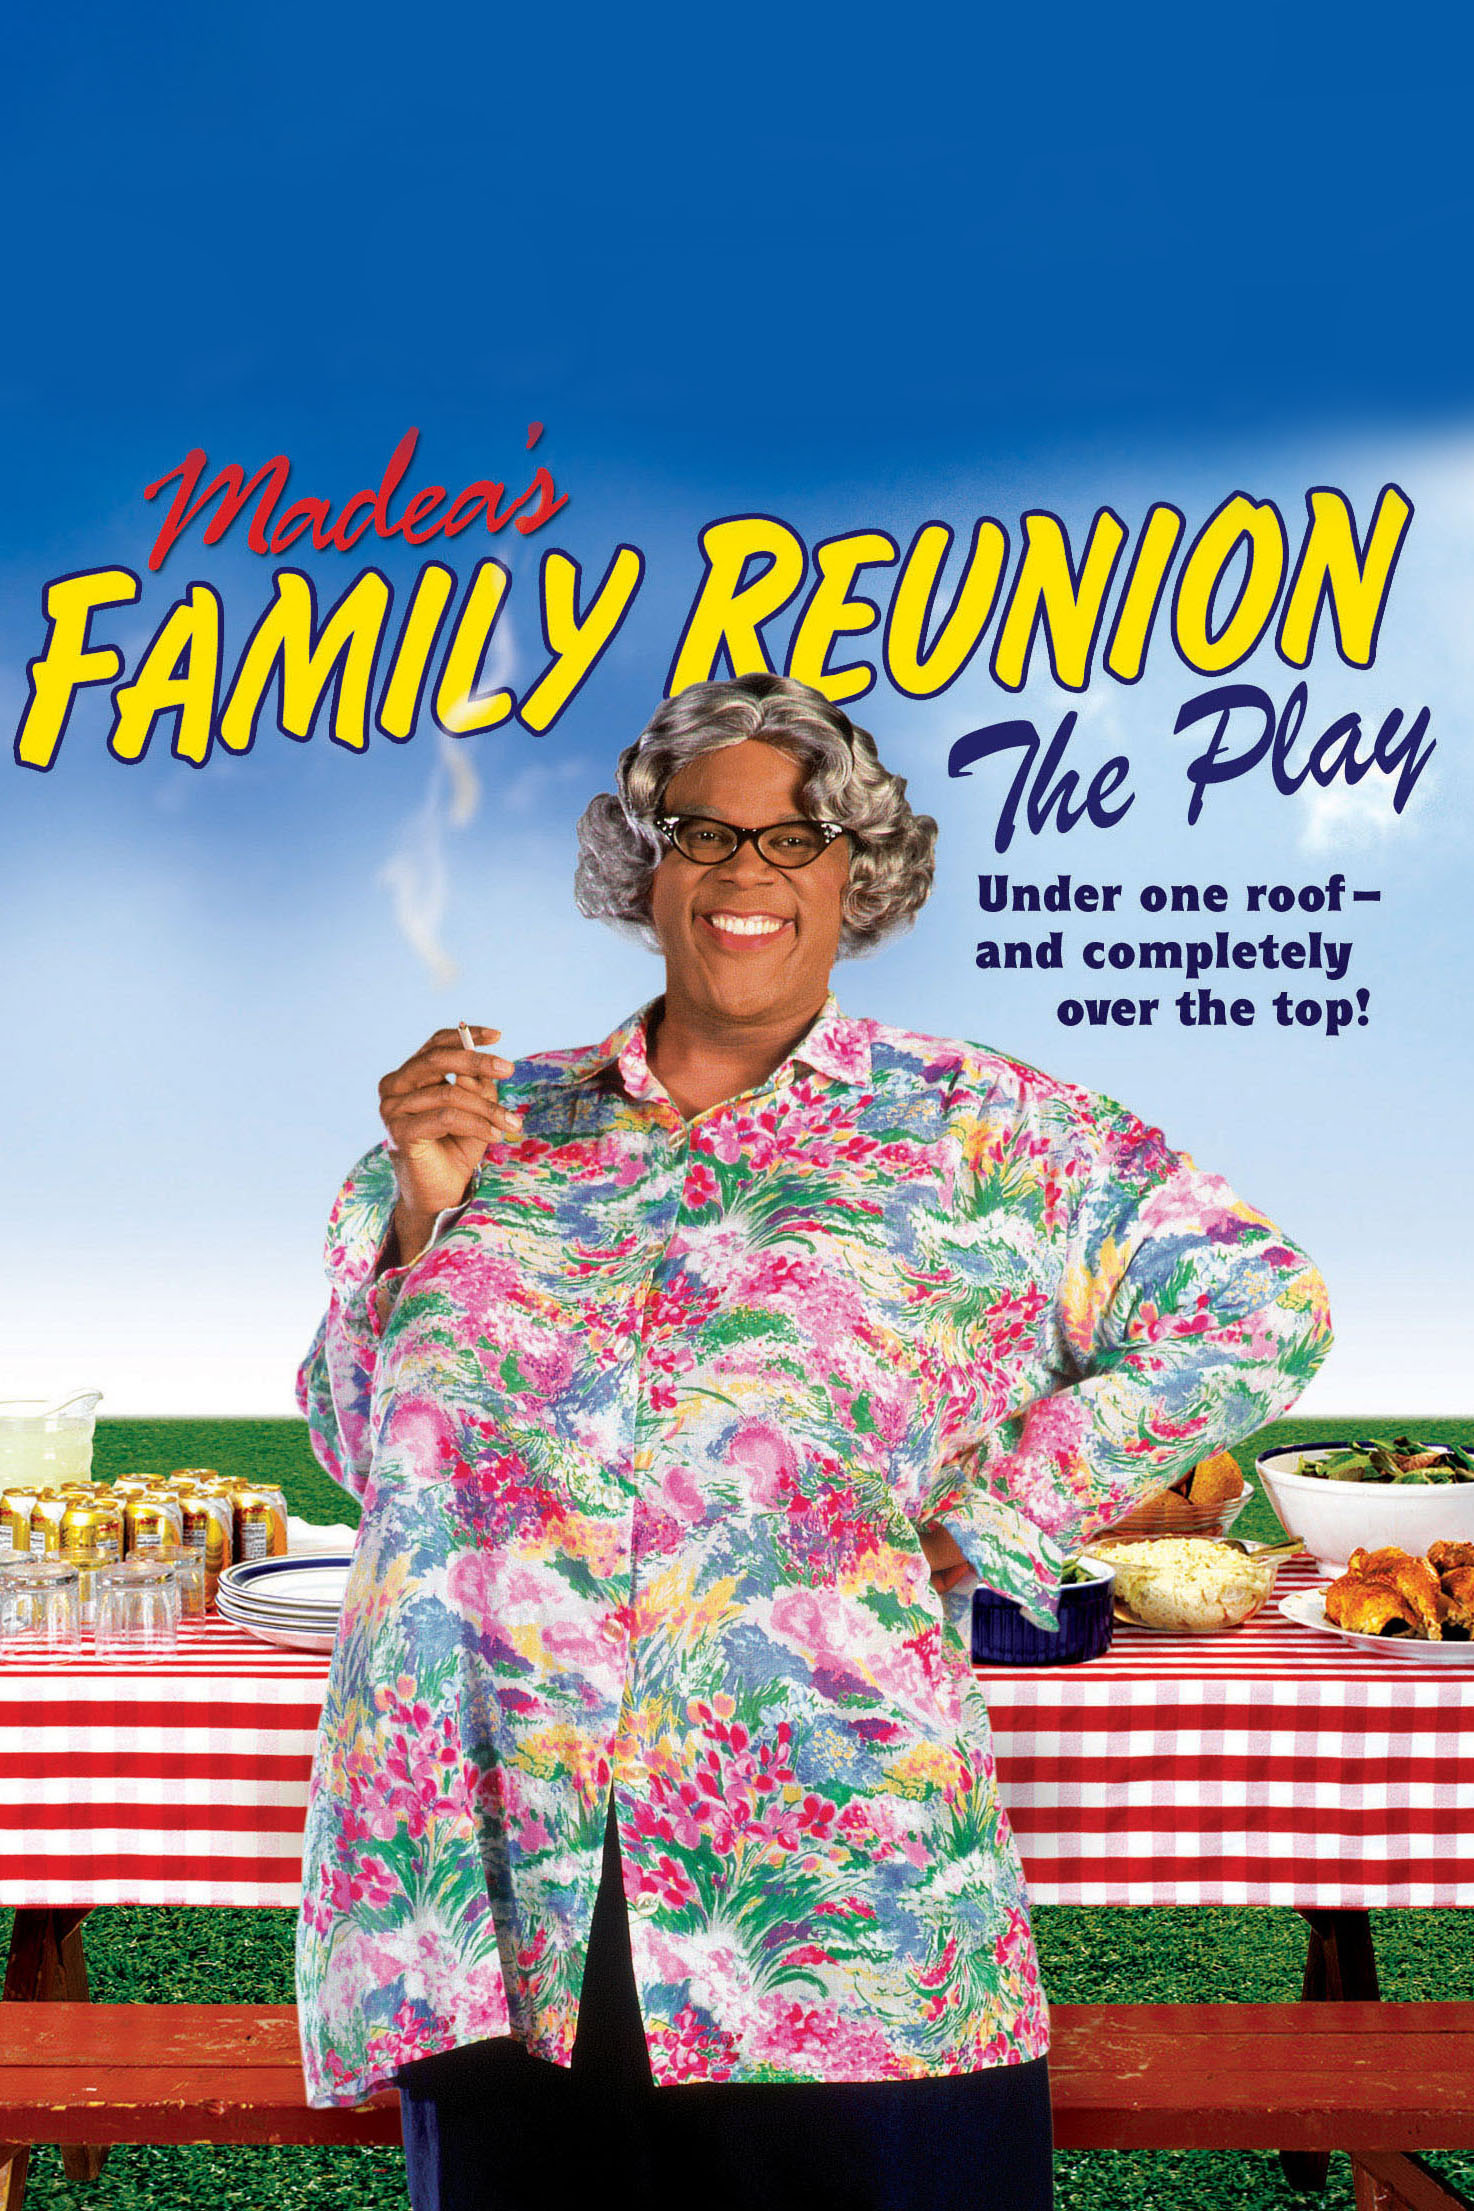 caitlin vance recommends madea reunion full movie pic